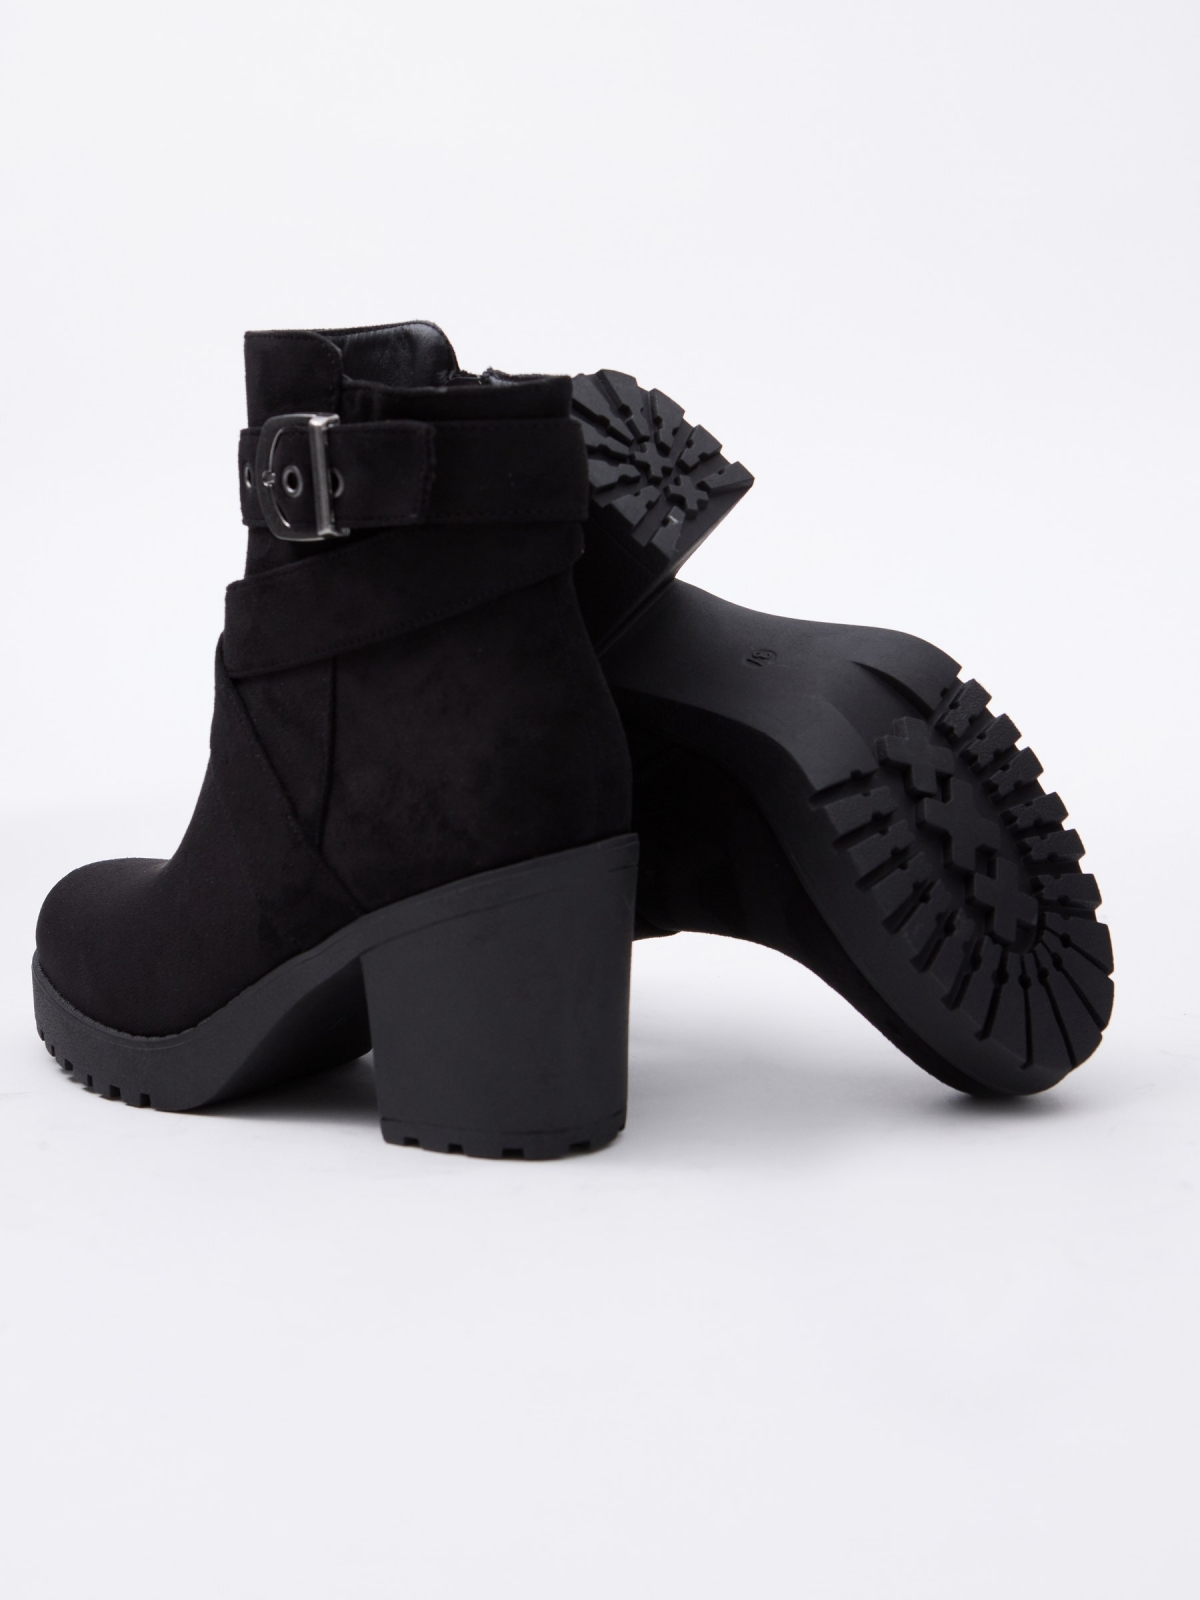 Black ankle boot with crossed straps and buckle black detail view